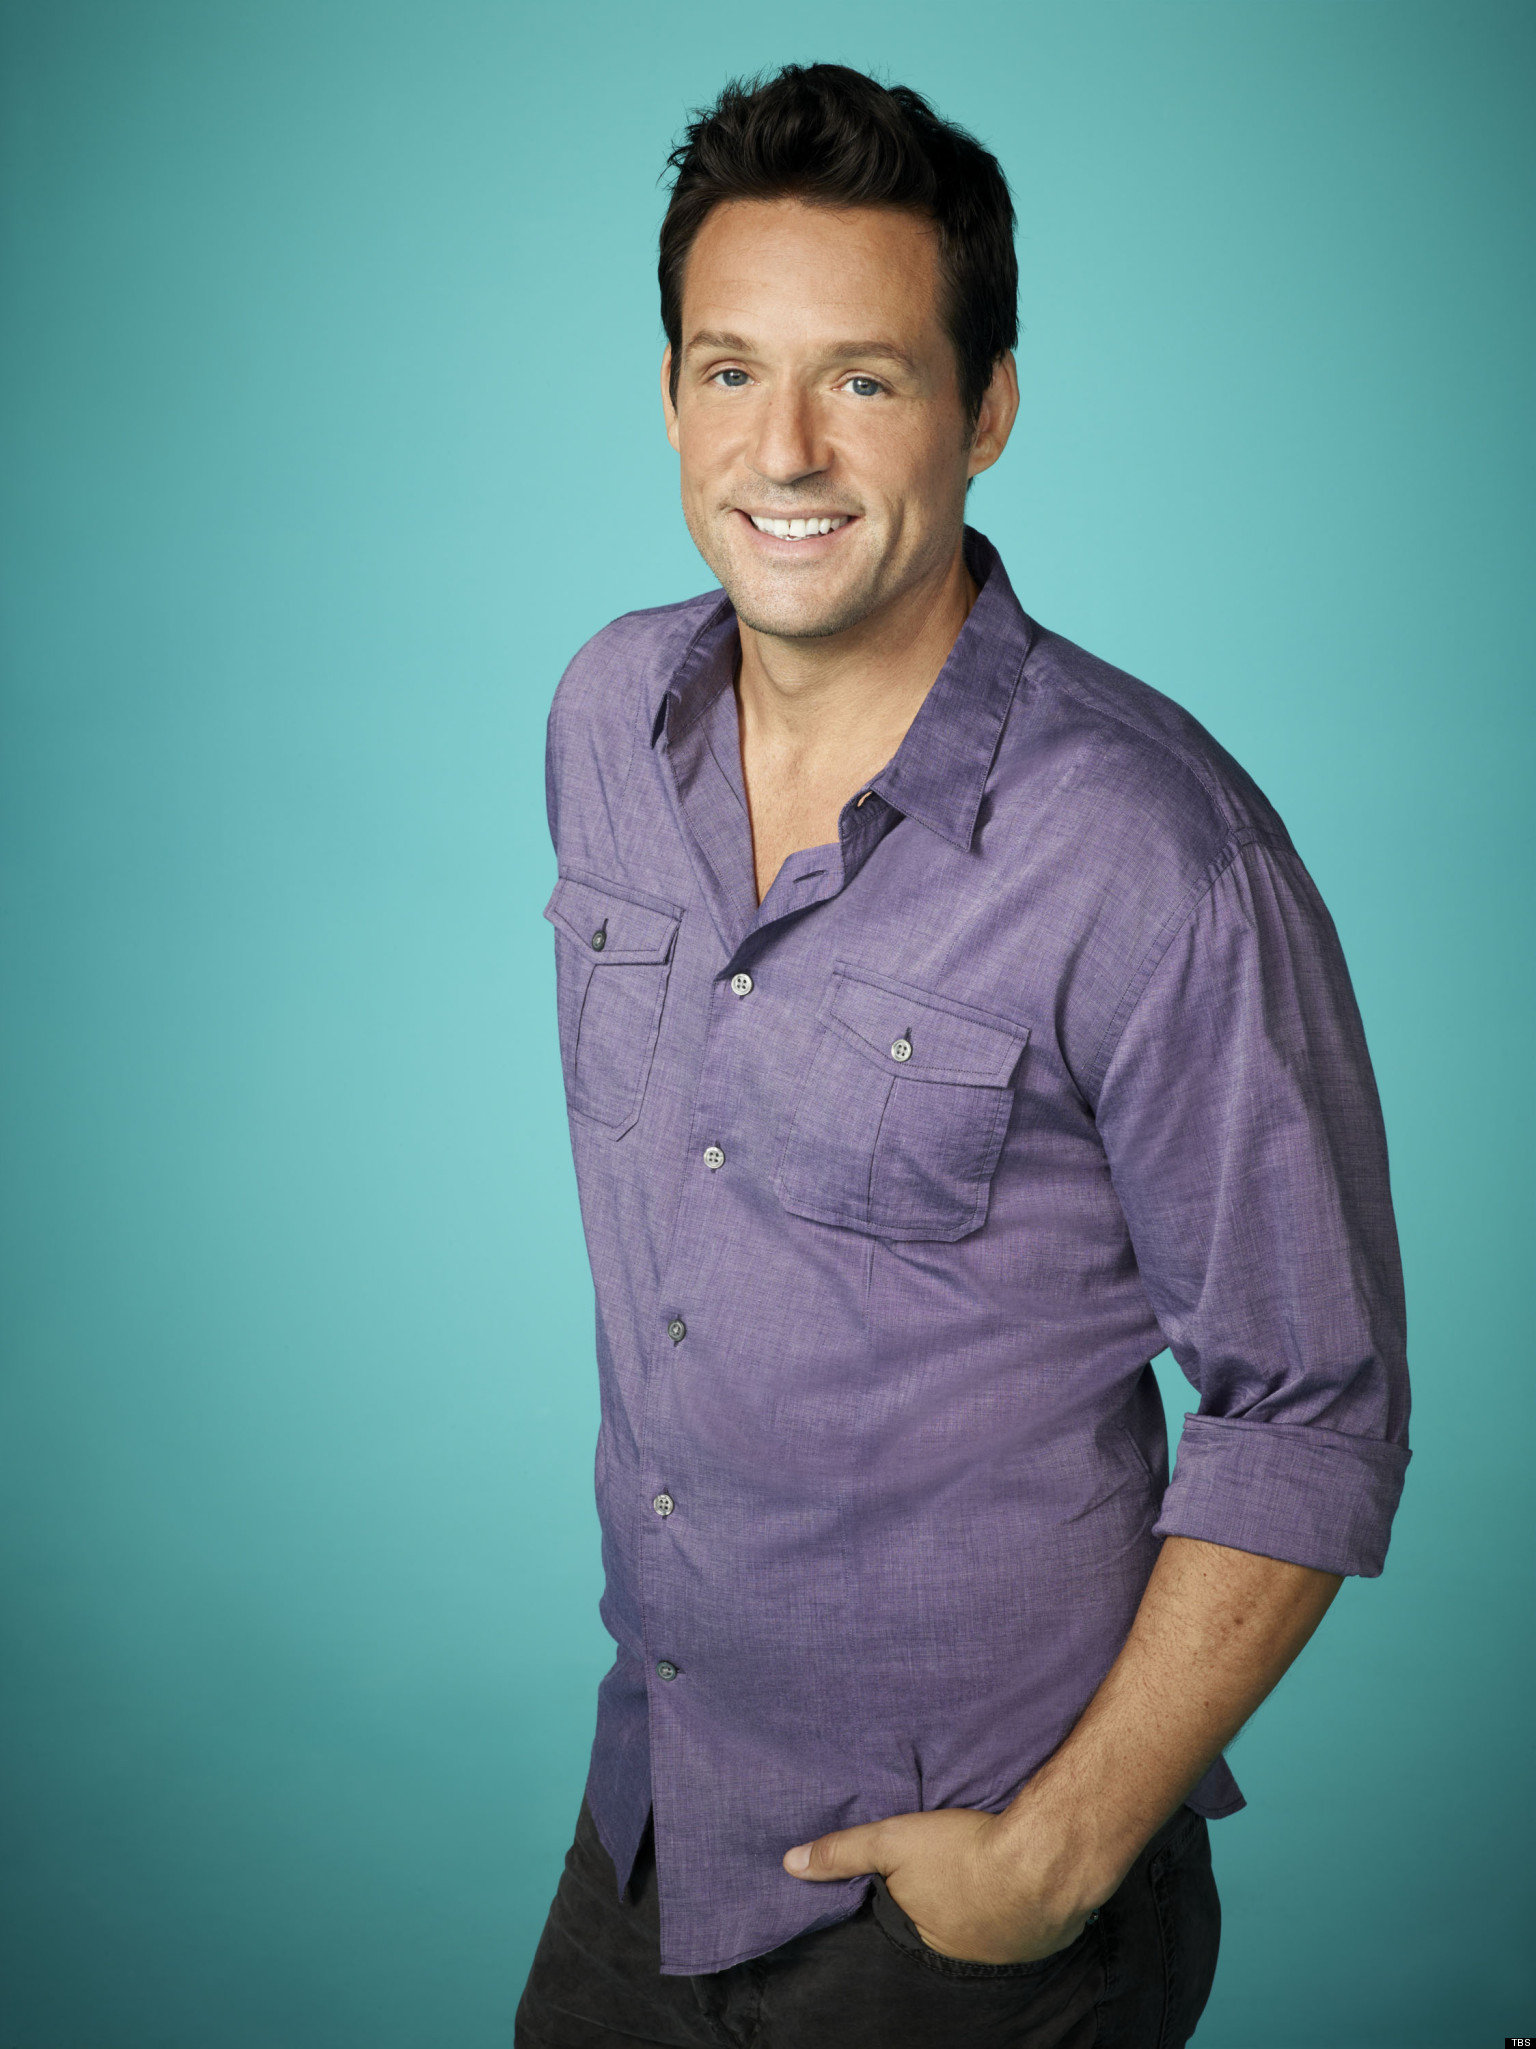 Cougar Town Season 4 Josh Hopkins On The Move To Tbs More Nudity 